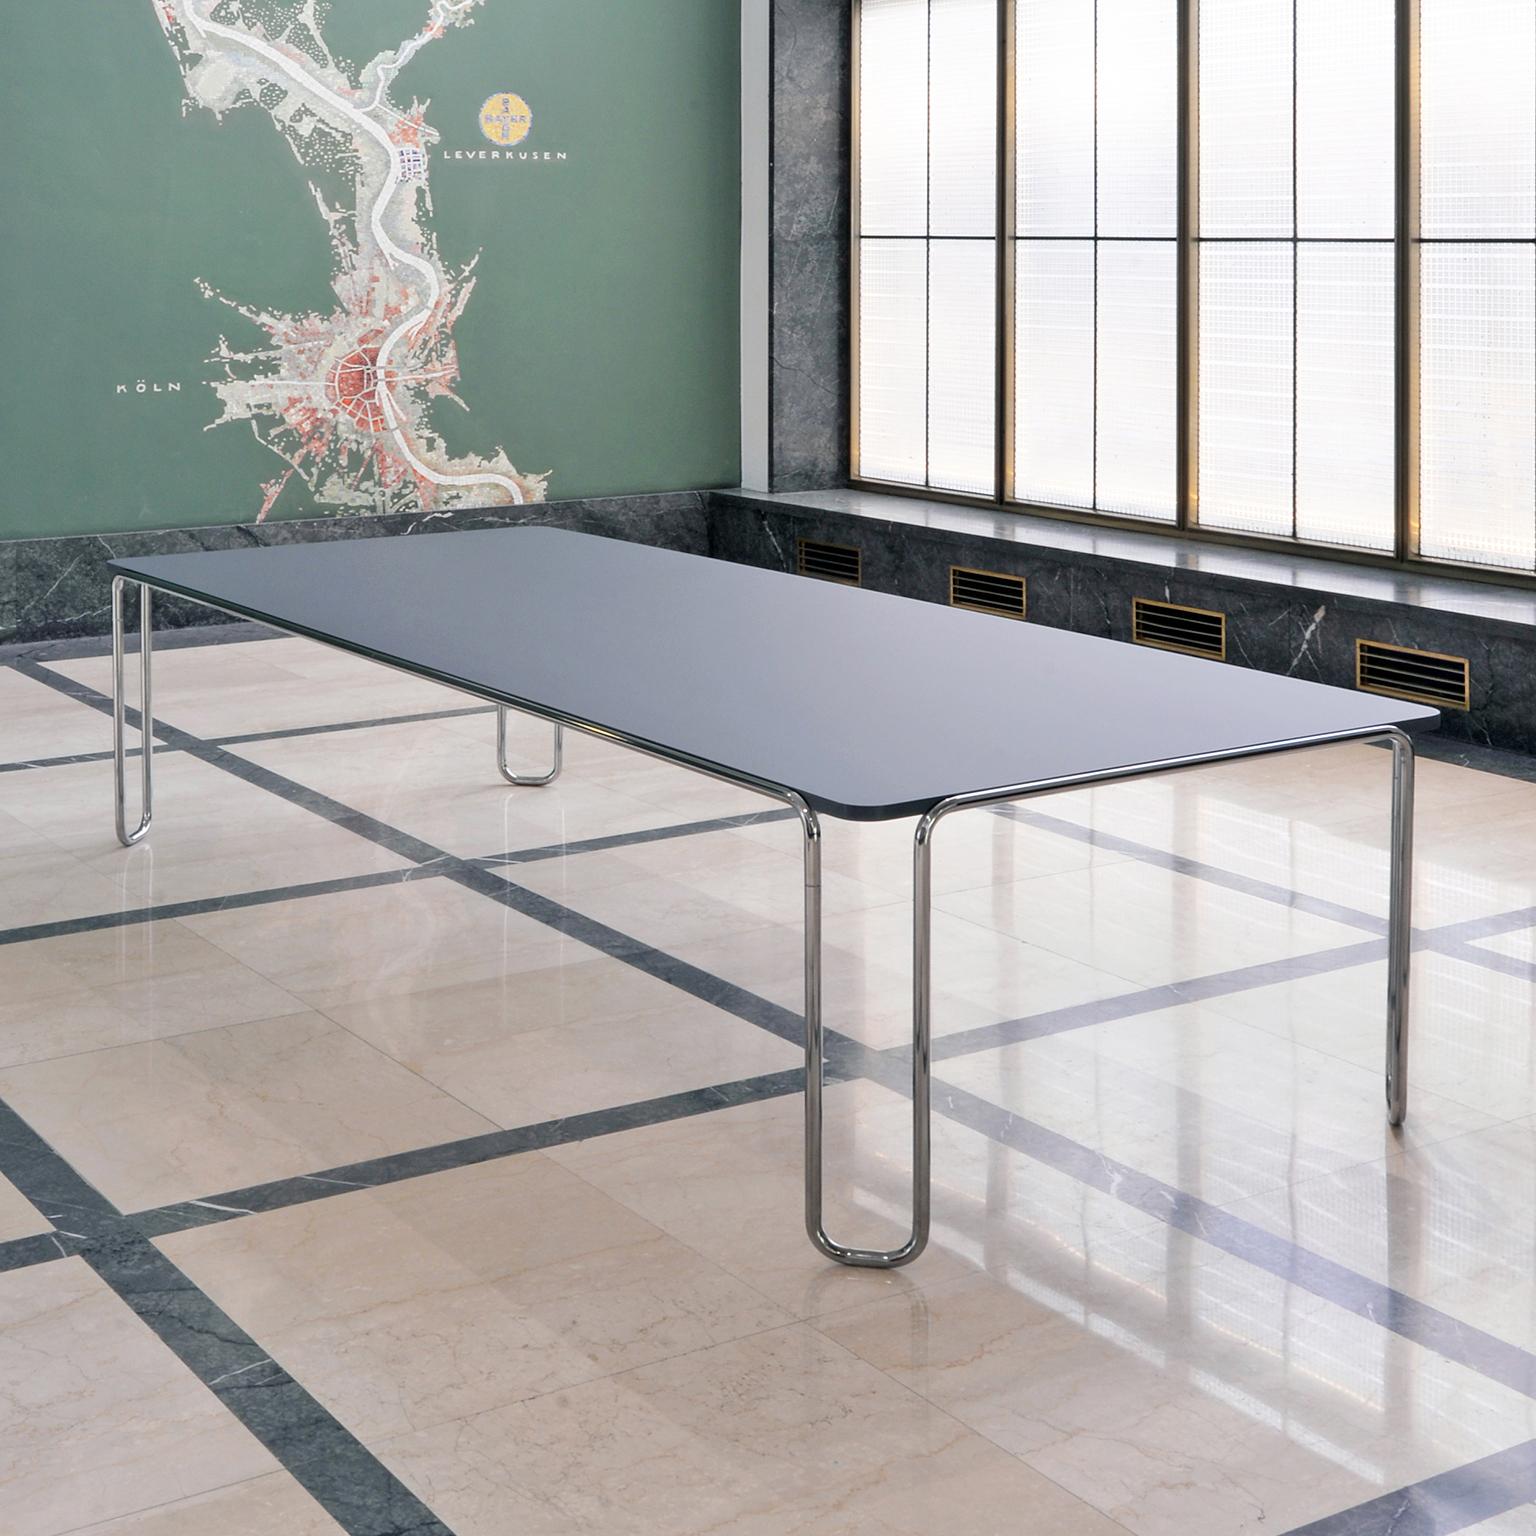 Large modernist ultra-thin tubular-steel table with graphical shape designed and manufactured by GMD Berlin.
Delivery time: 6-8 weeks.